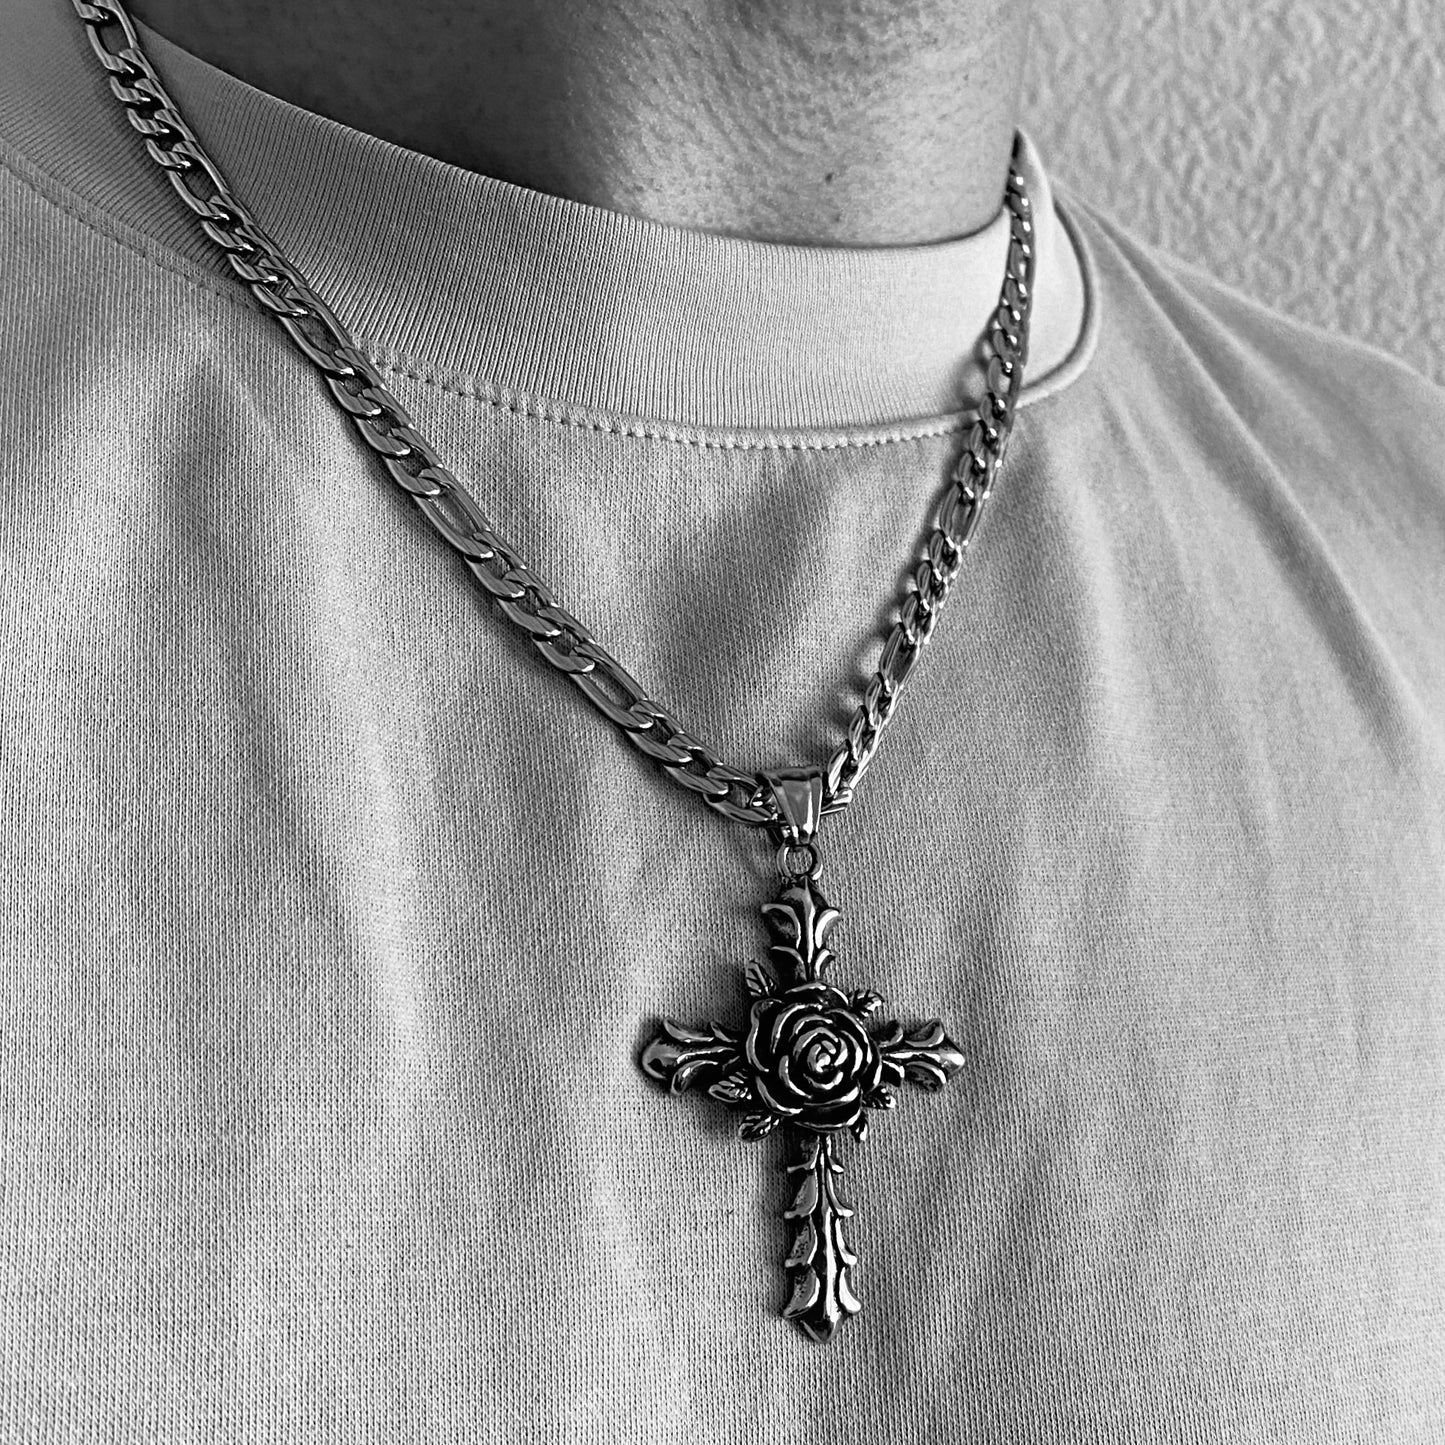 Blooming Cross Pendant with Chain